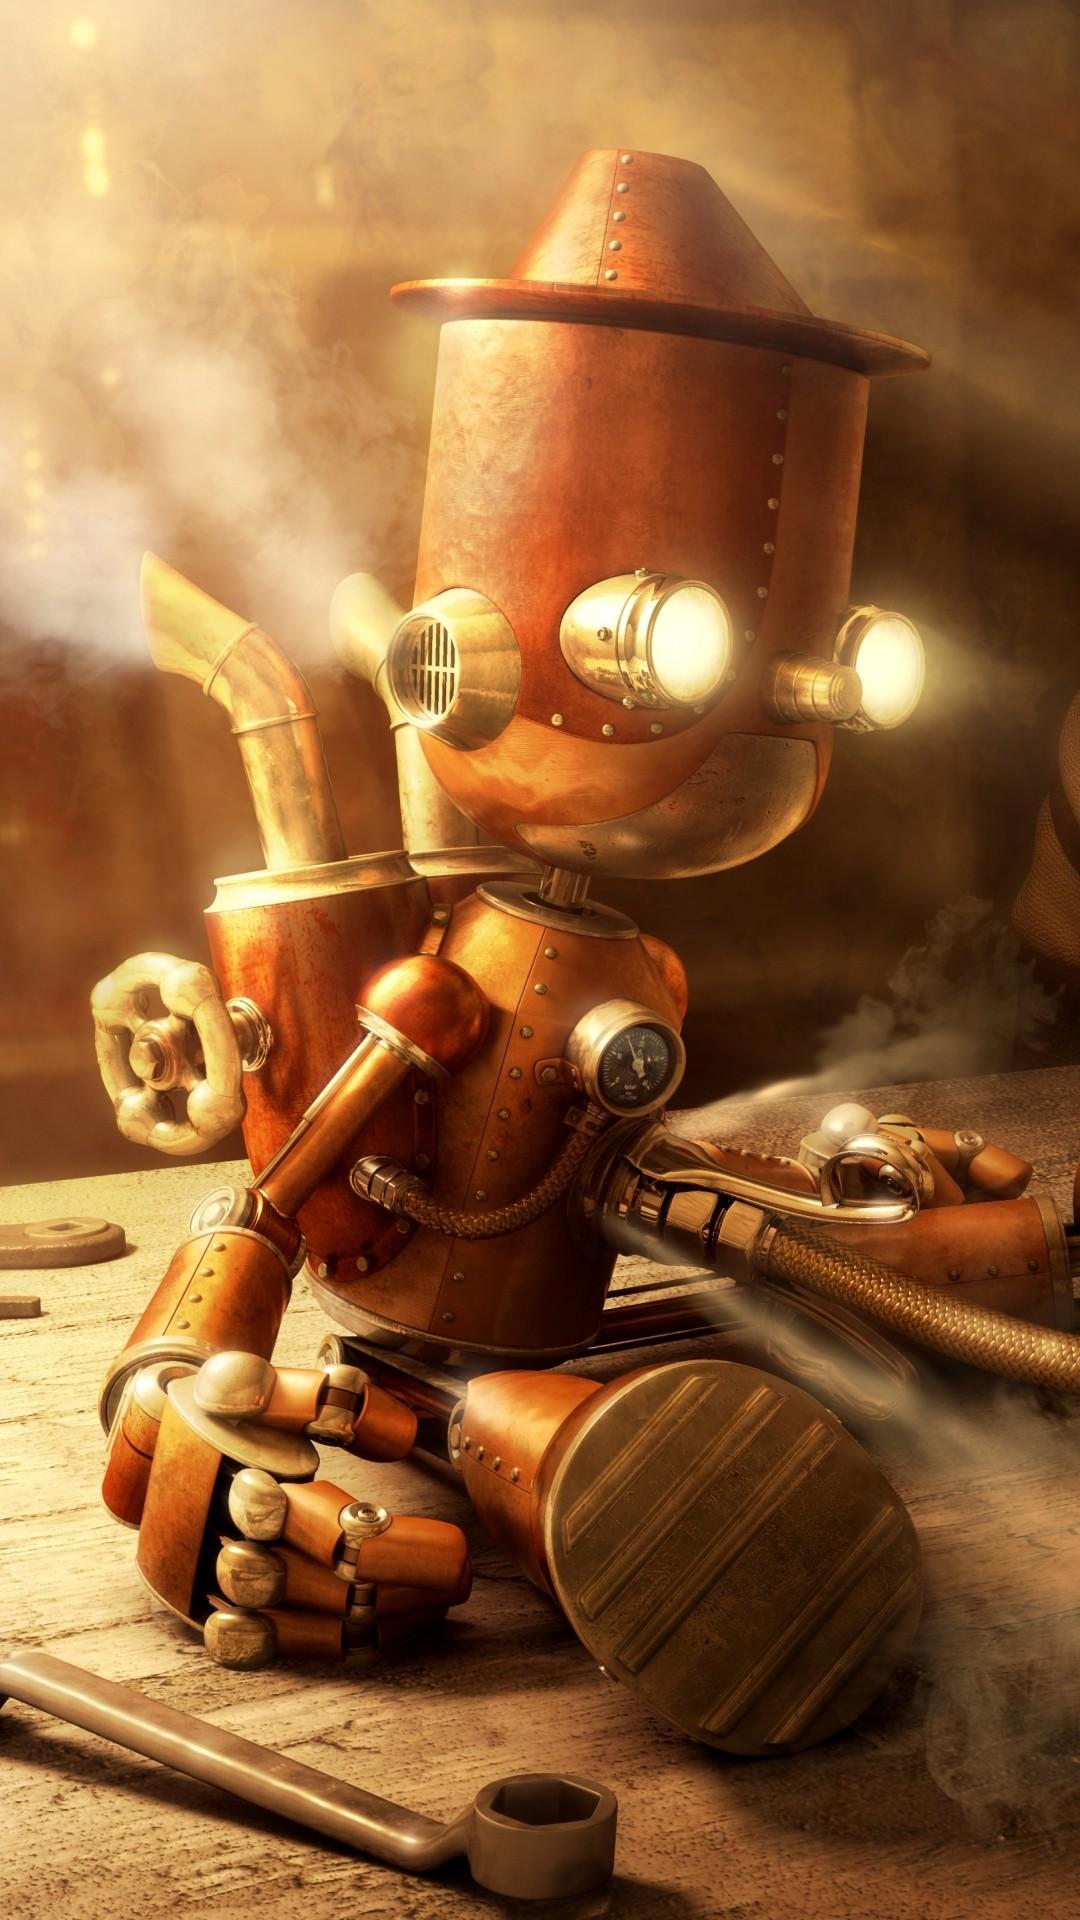 1080x1920 wallpaper. Steampunk robot, made of copper and brass, sitting on a workbench - Steampunk